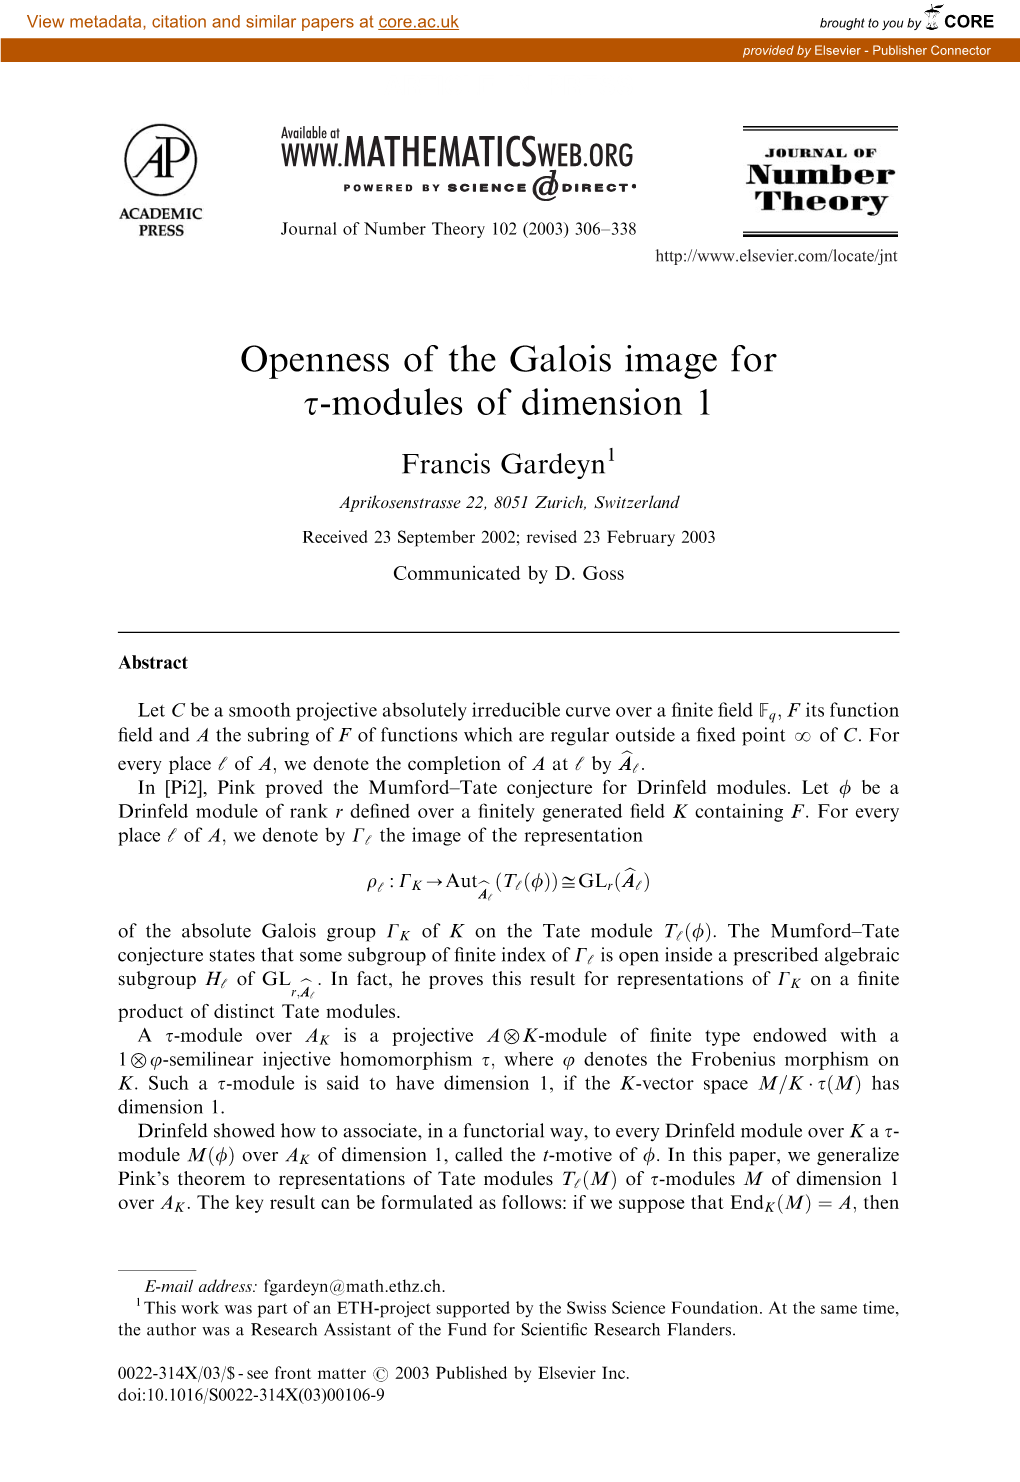 Openness of the Galois Image for T-Modules of Dimension 1